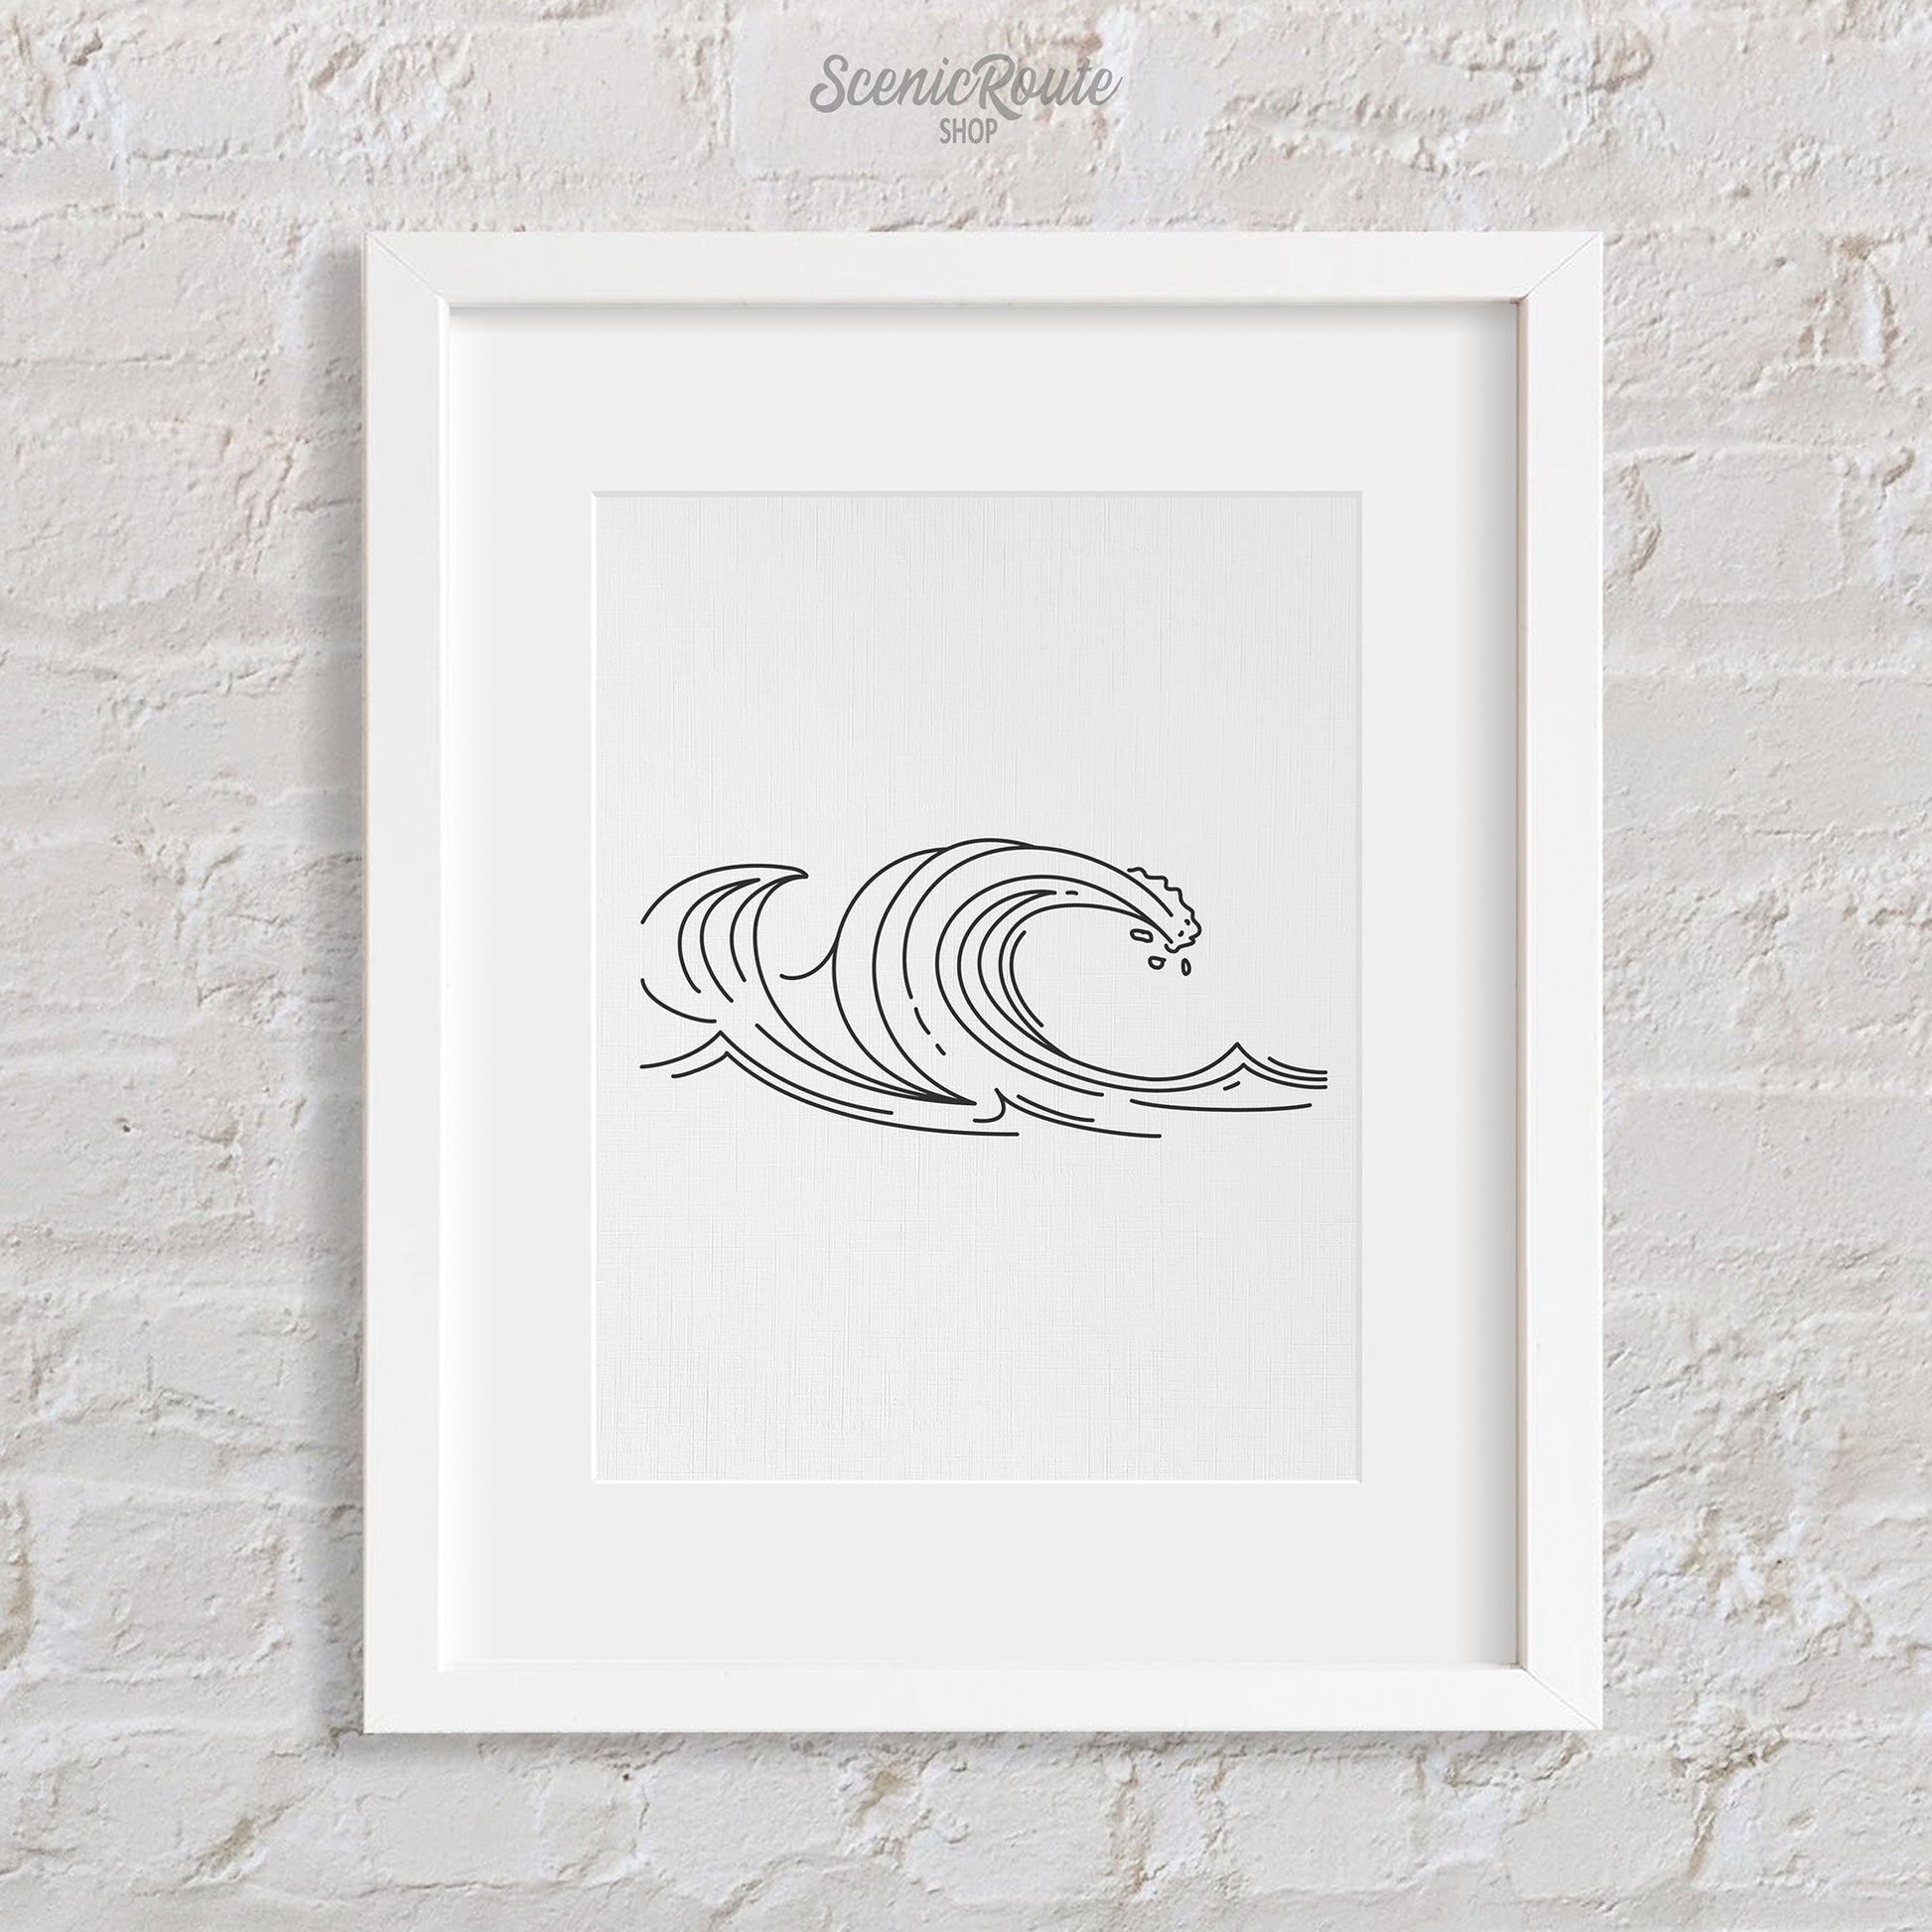 A framed line art drawing of Waves on a brick wall